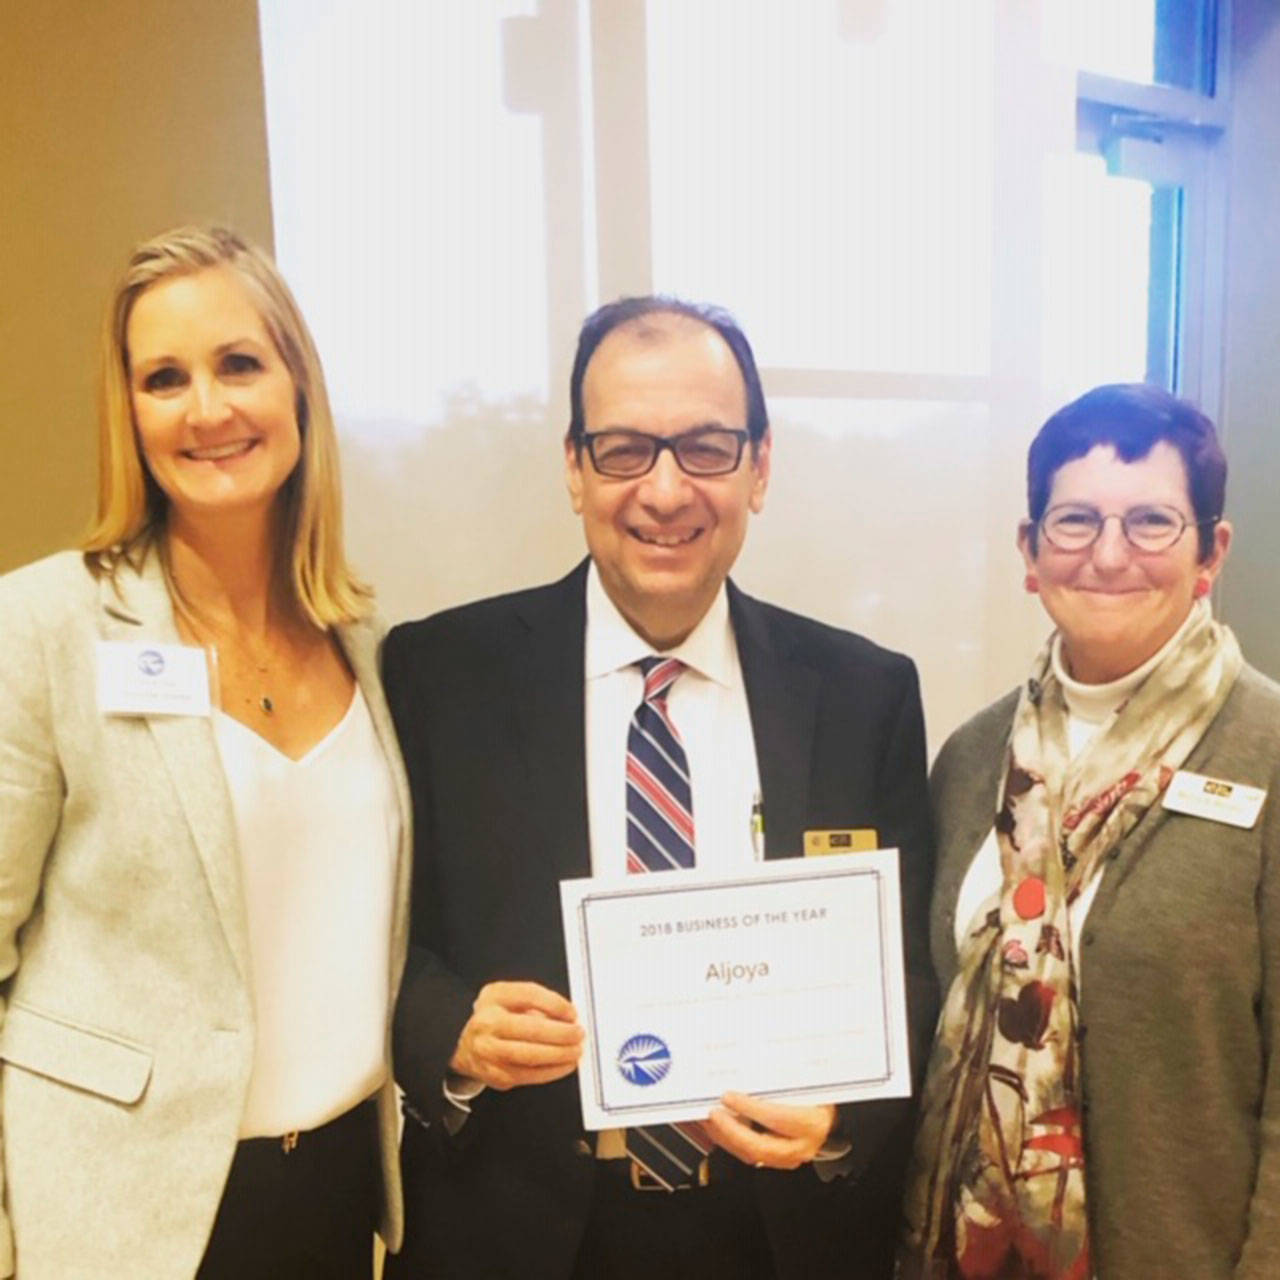 Chamber Director Laurie Givan presents the 2018 ‘business of the year’ award to Larry Almo and Marla Becker of Aljoya Mercer Island. Photo courtesy of Laurie Givan